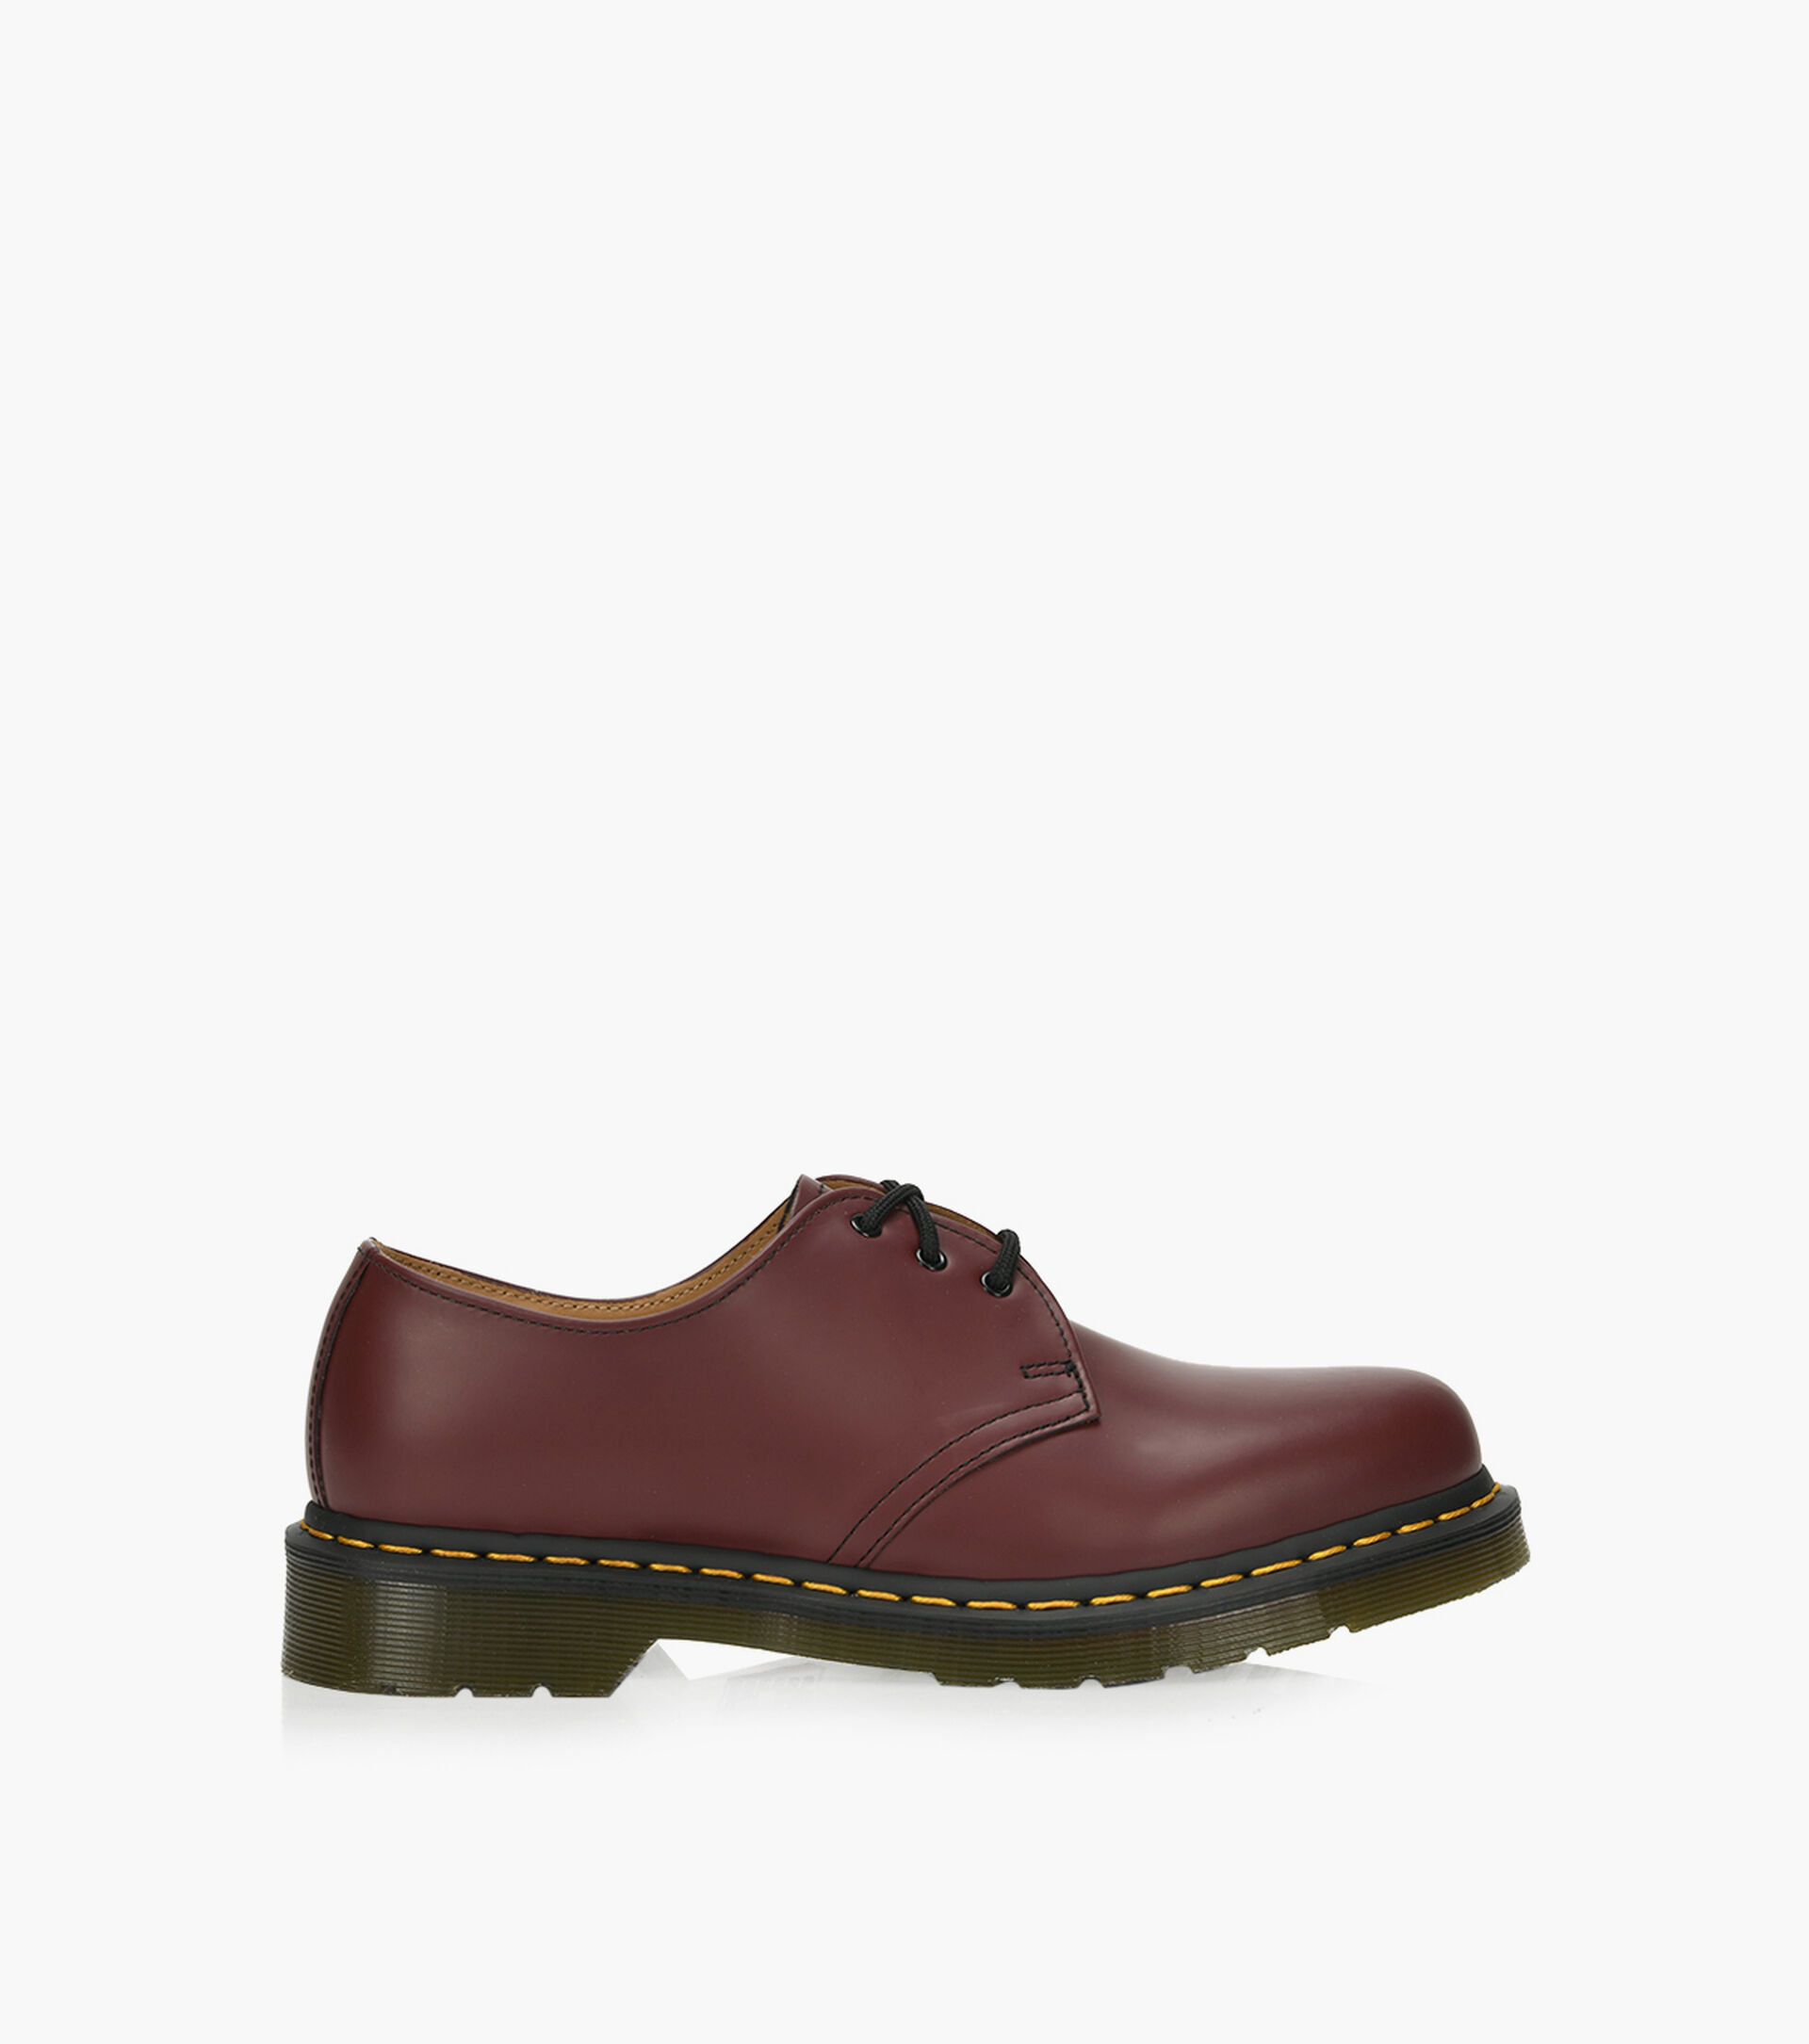 DR. MARTENS 1461 CHERRY - Leather | Browns Shoes